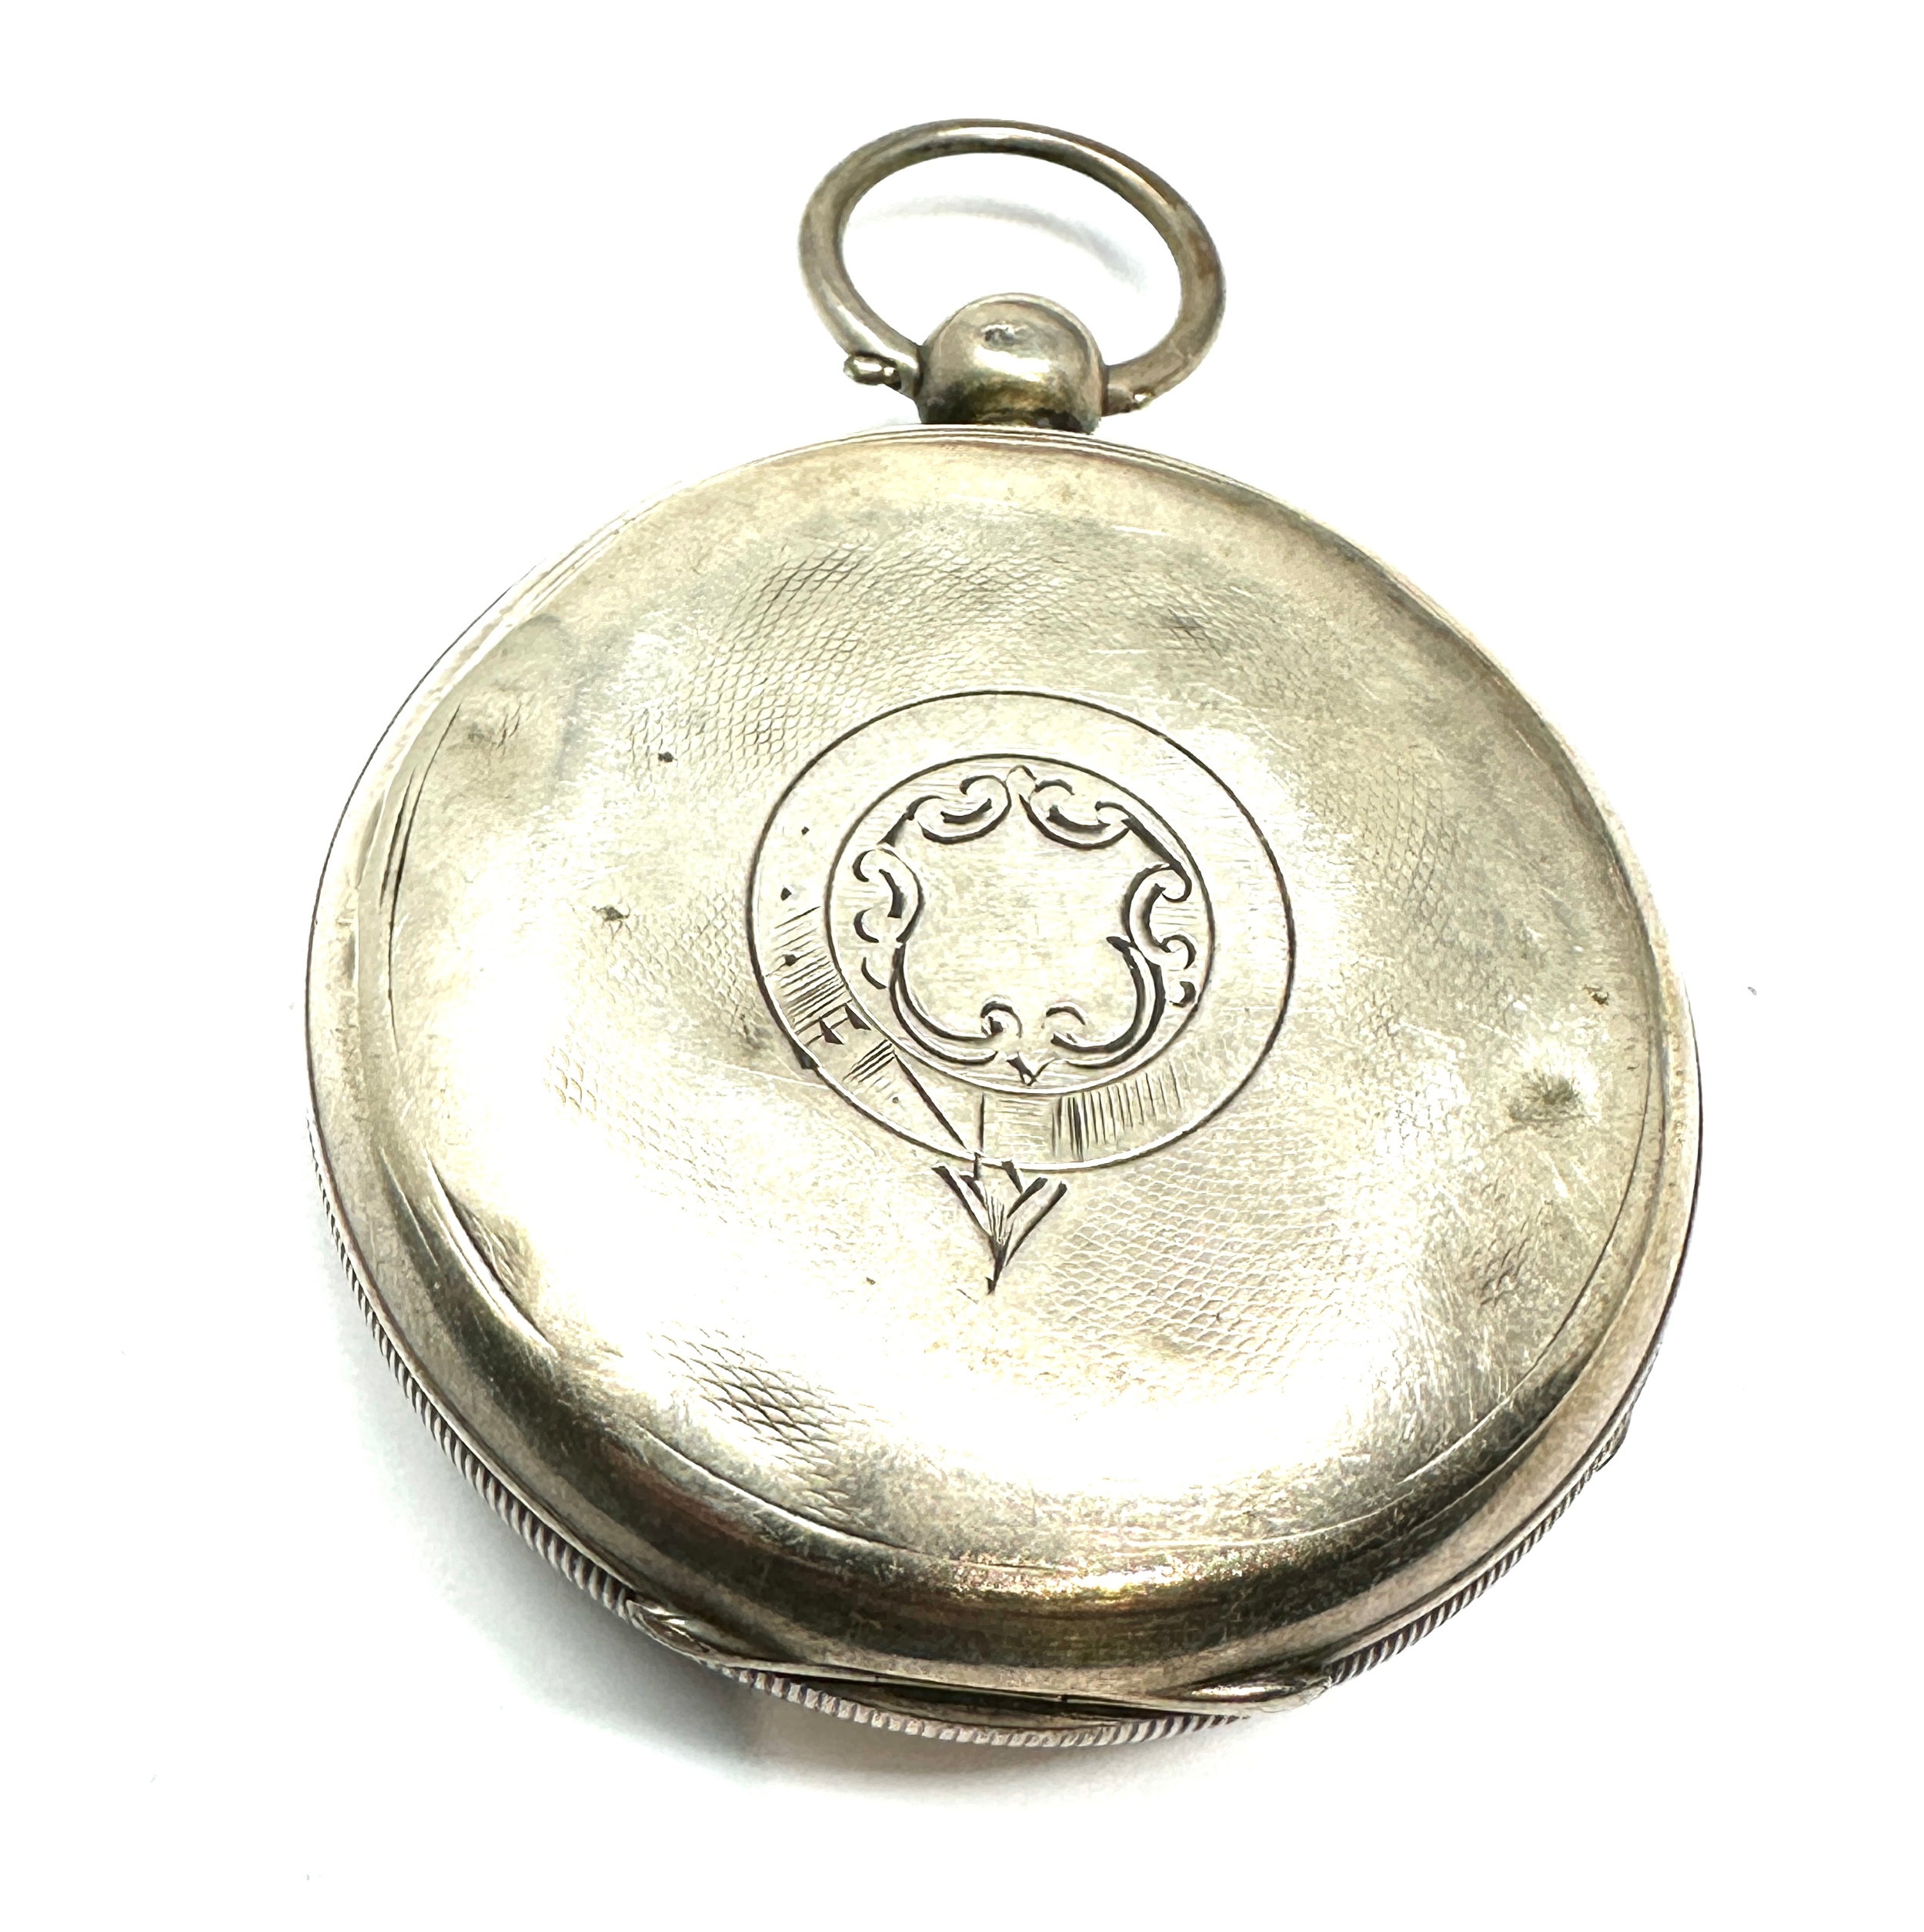 Antique silver open face pocket watch j.g graves sheffield the watch is not ticking - Image 2 of 2